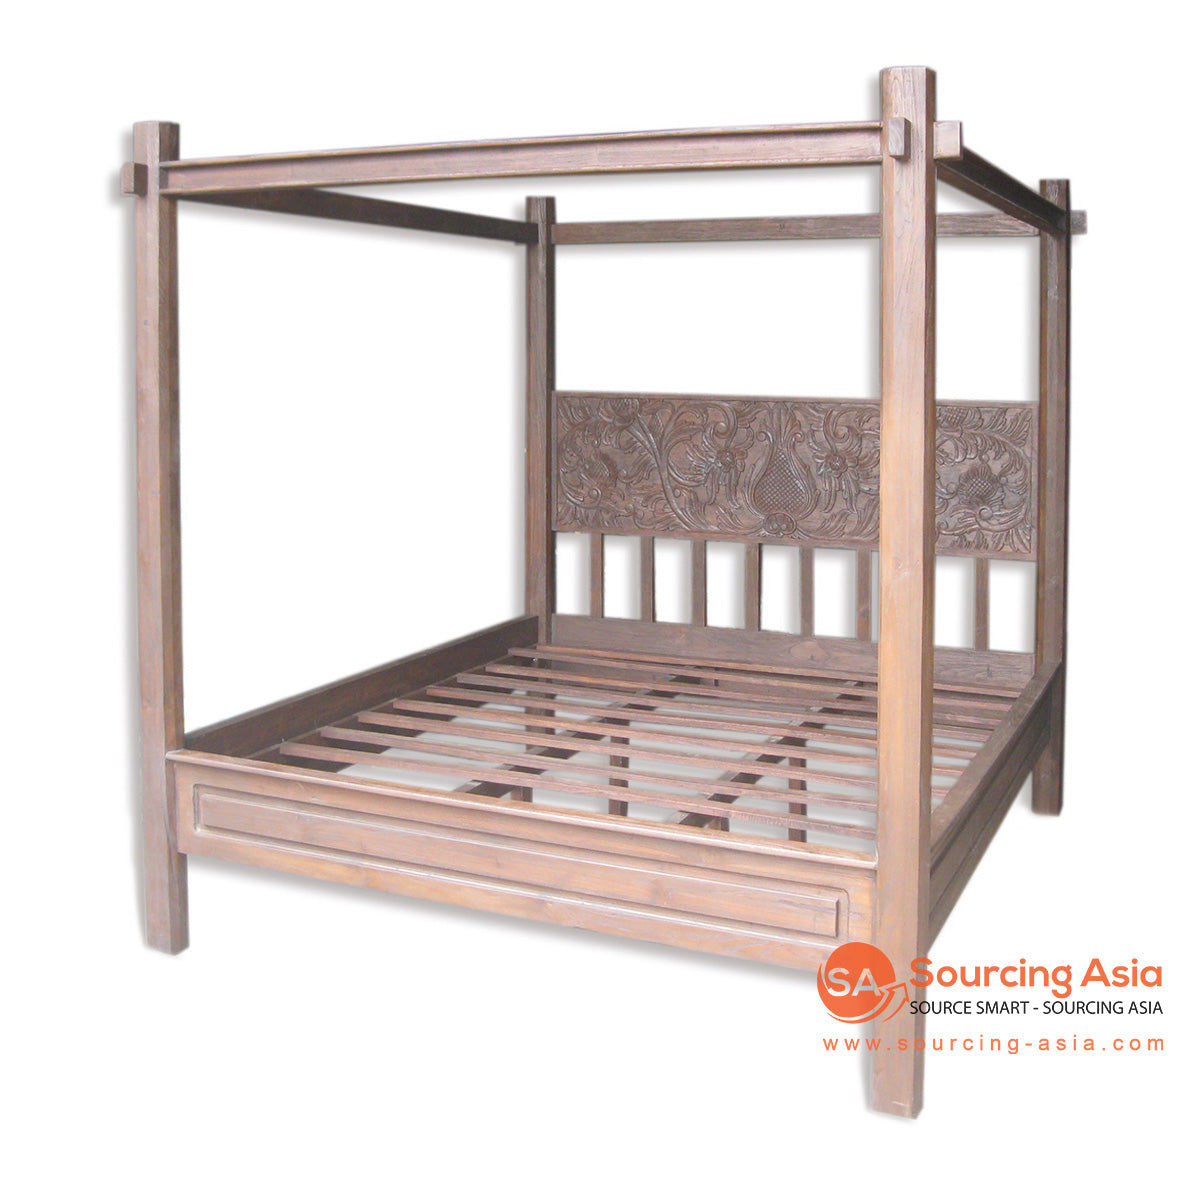 A Teak Wood Bed Vs Other Kinds of Wooden Beds – Who's The Winner? - Aakriti  Art Creations